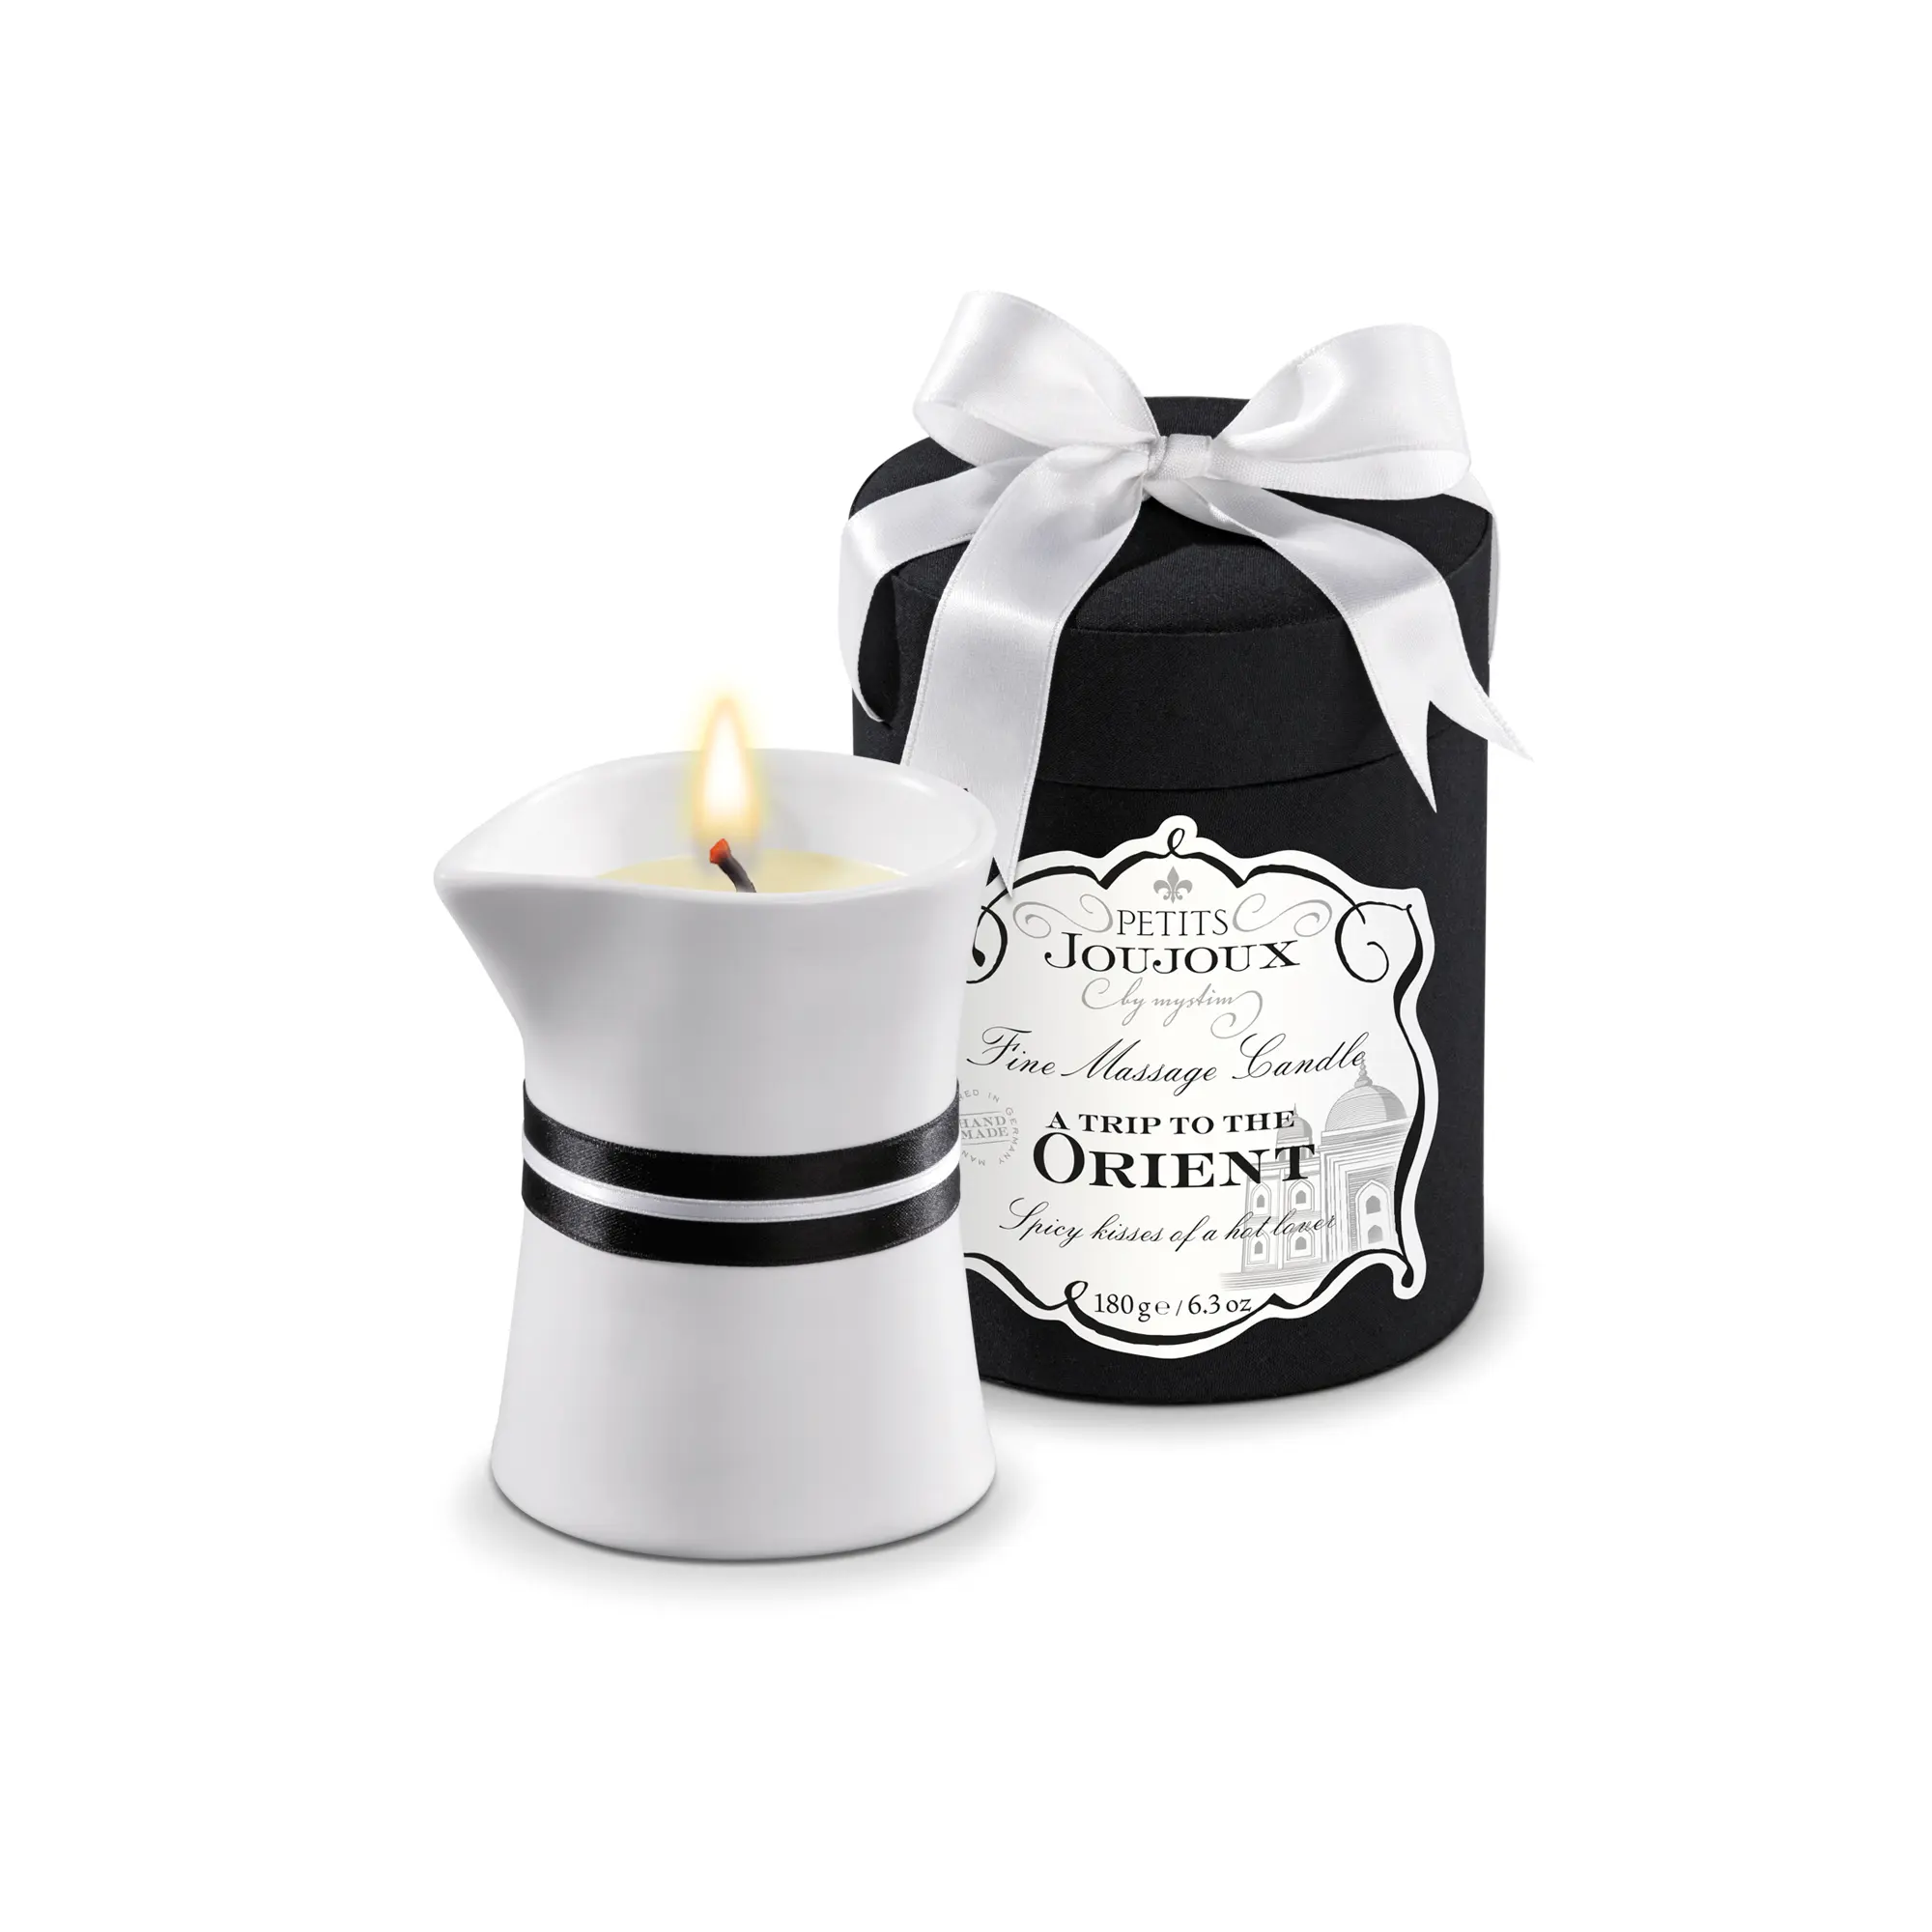 A trip to the Orient - Candle 6.7 oz